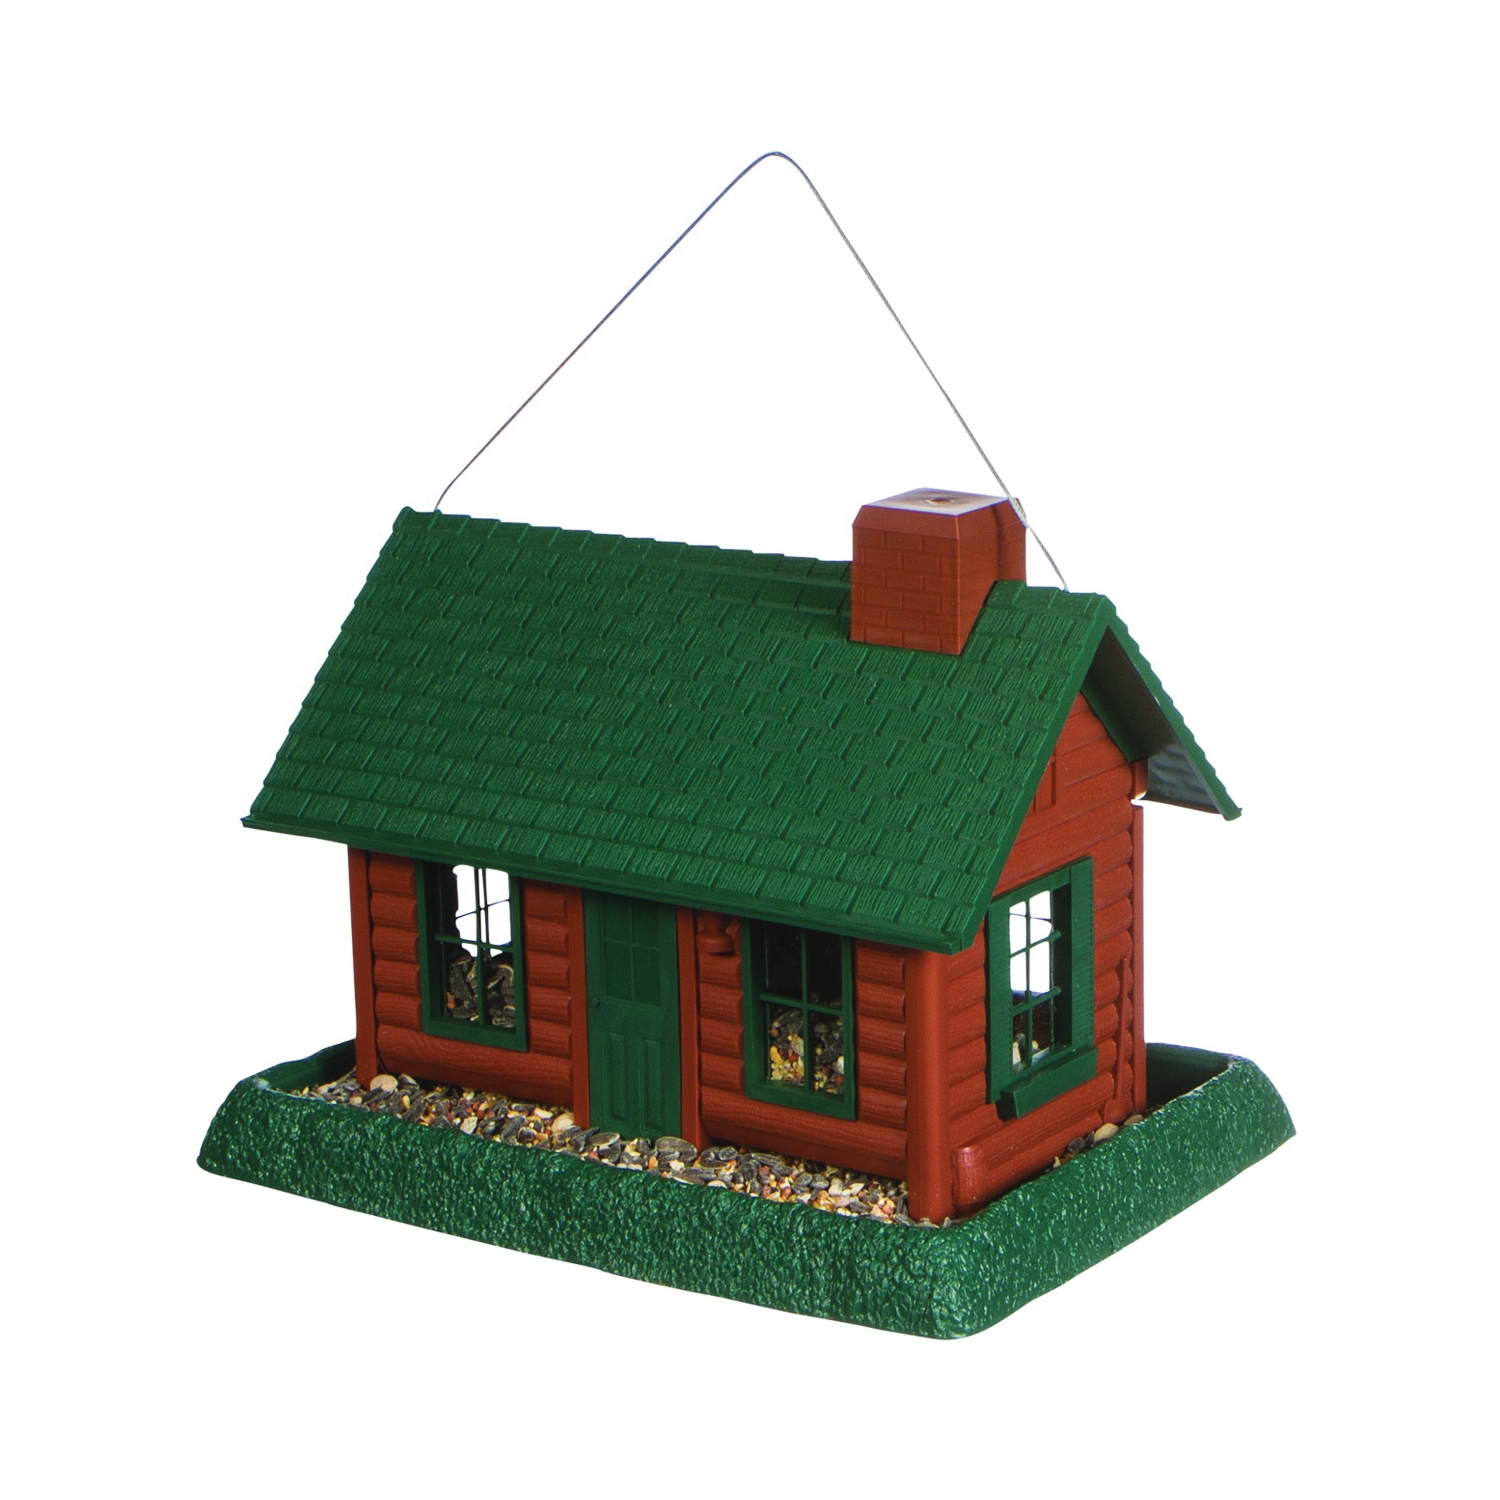 North States 9063 Hopper Bird Feeder, Log Cabin, 8 lb, Plastic, Green, 11 in H, Hanging/Pole Mounting - 1